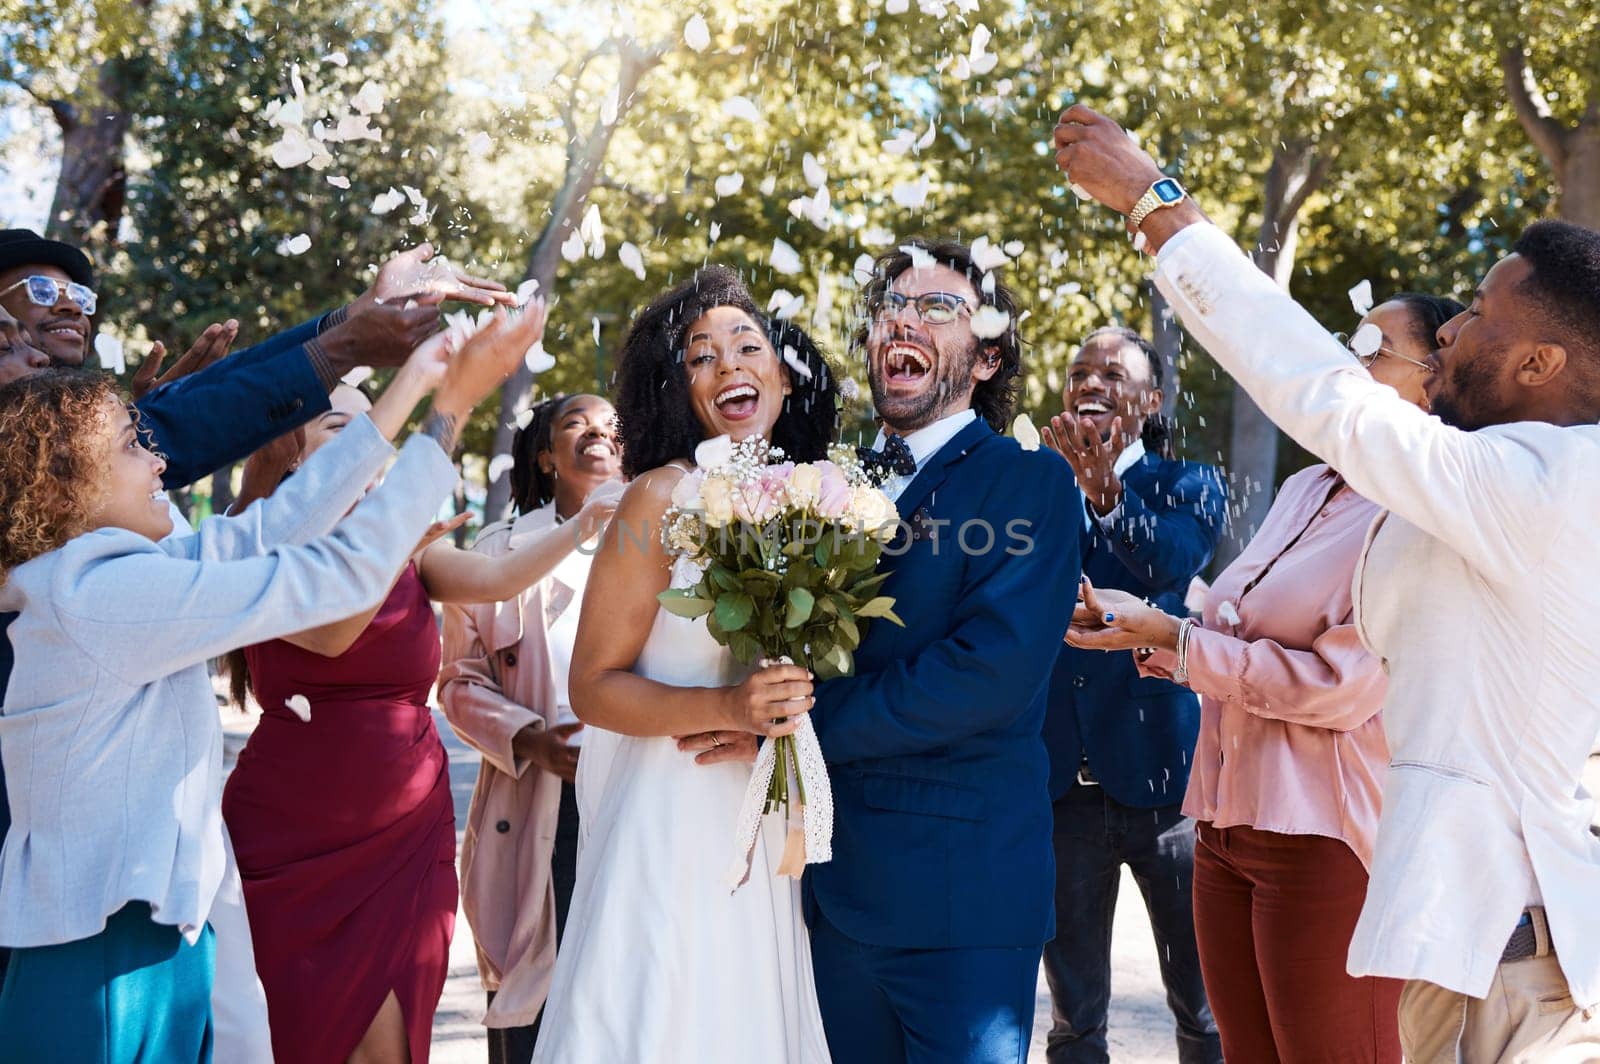 Wedding confetti, marriage couple and celebration of audience throwing flower petals outdoor. Happiness, excited and social event with bride and man laughing from love and congratulations applause.